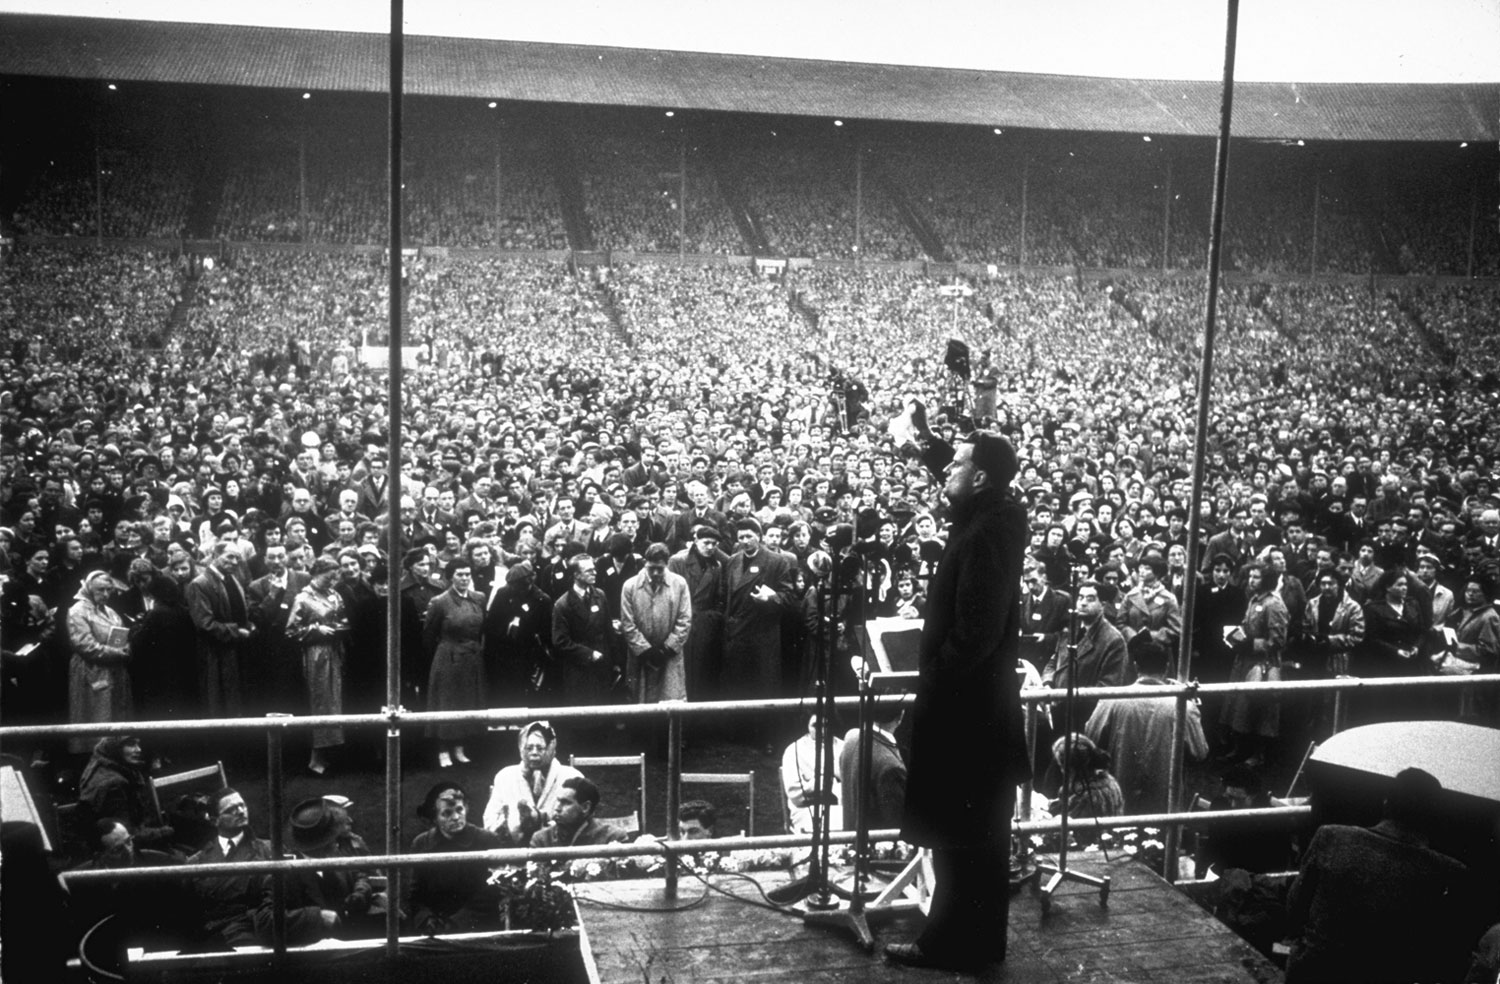 Graham waves a handkerchief while standing at a podium during a service in front of a crowd at Wembley Stadium.